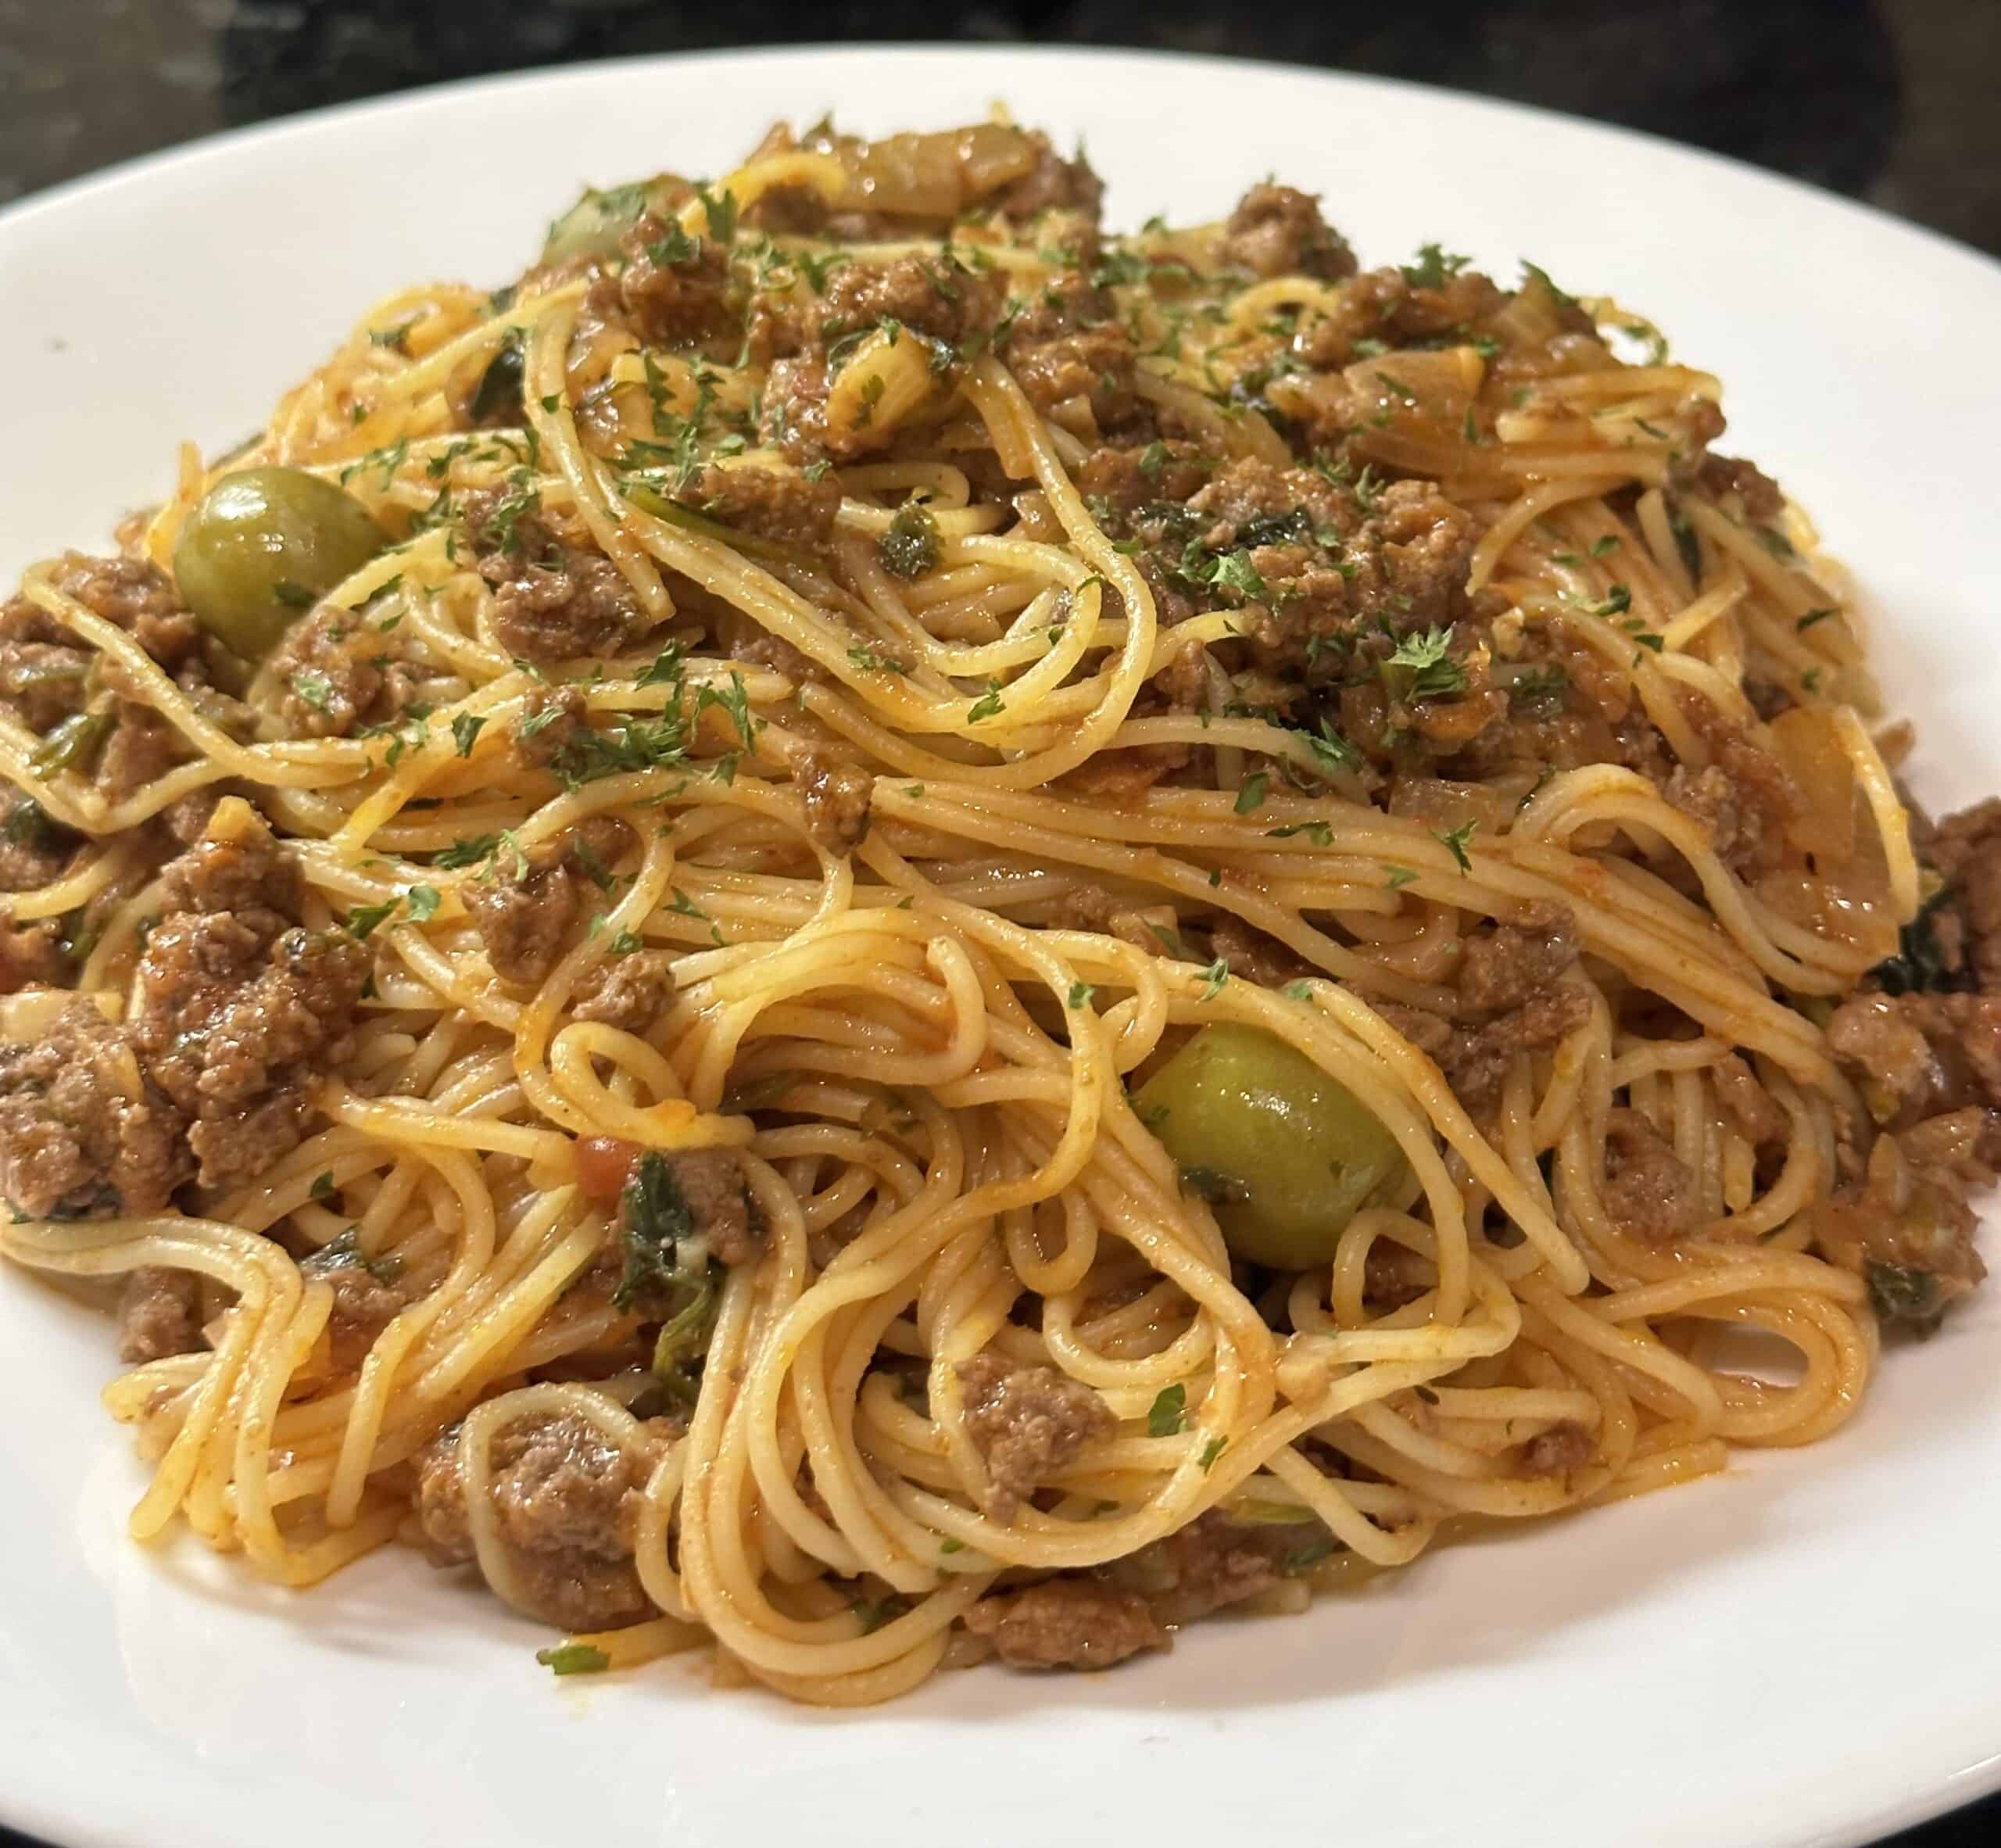 Angel hair pasta with ground beef is served on a white plate.